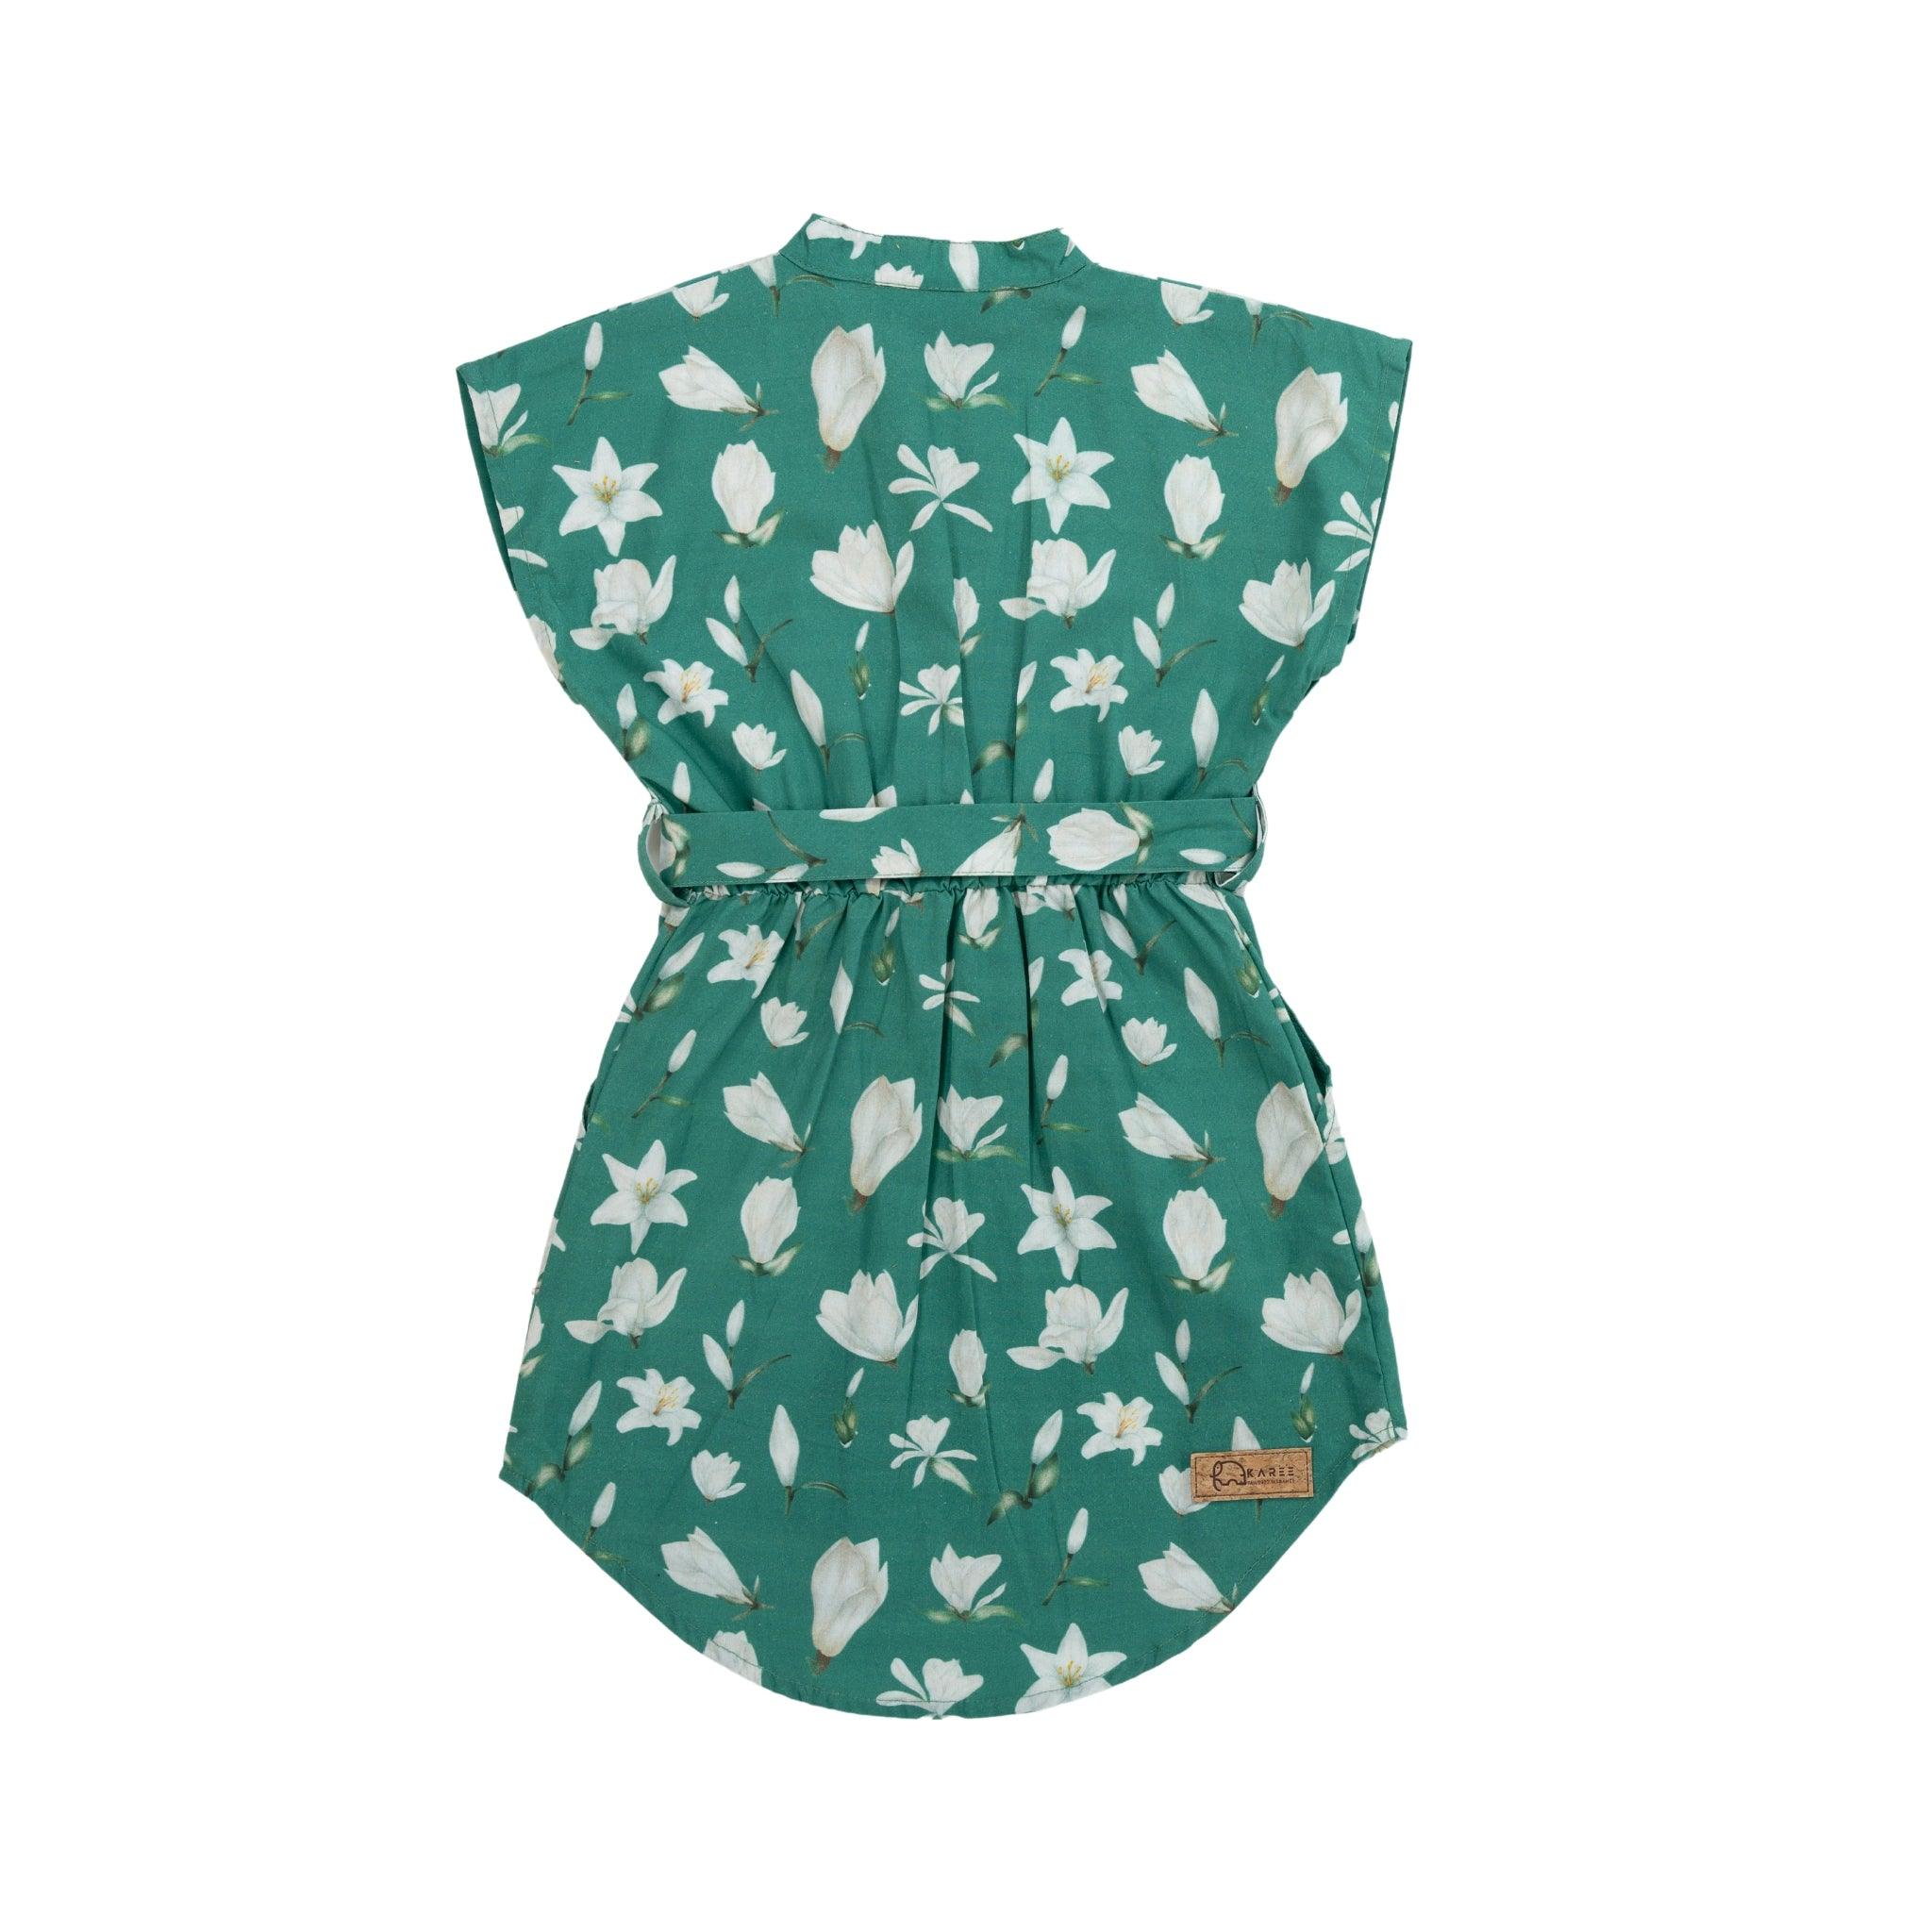 Bottle Green Lilly Blossom Cotton Shirt Dress for Kids by Karee, with short sleeves and a cinched waist, displayed against a white background.